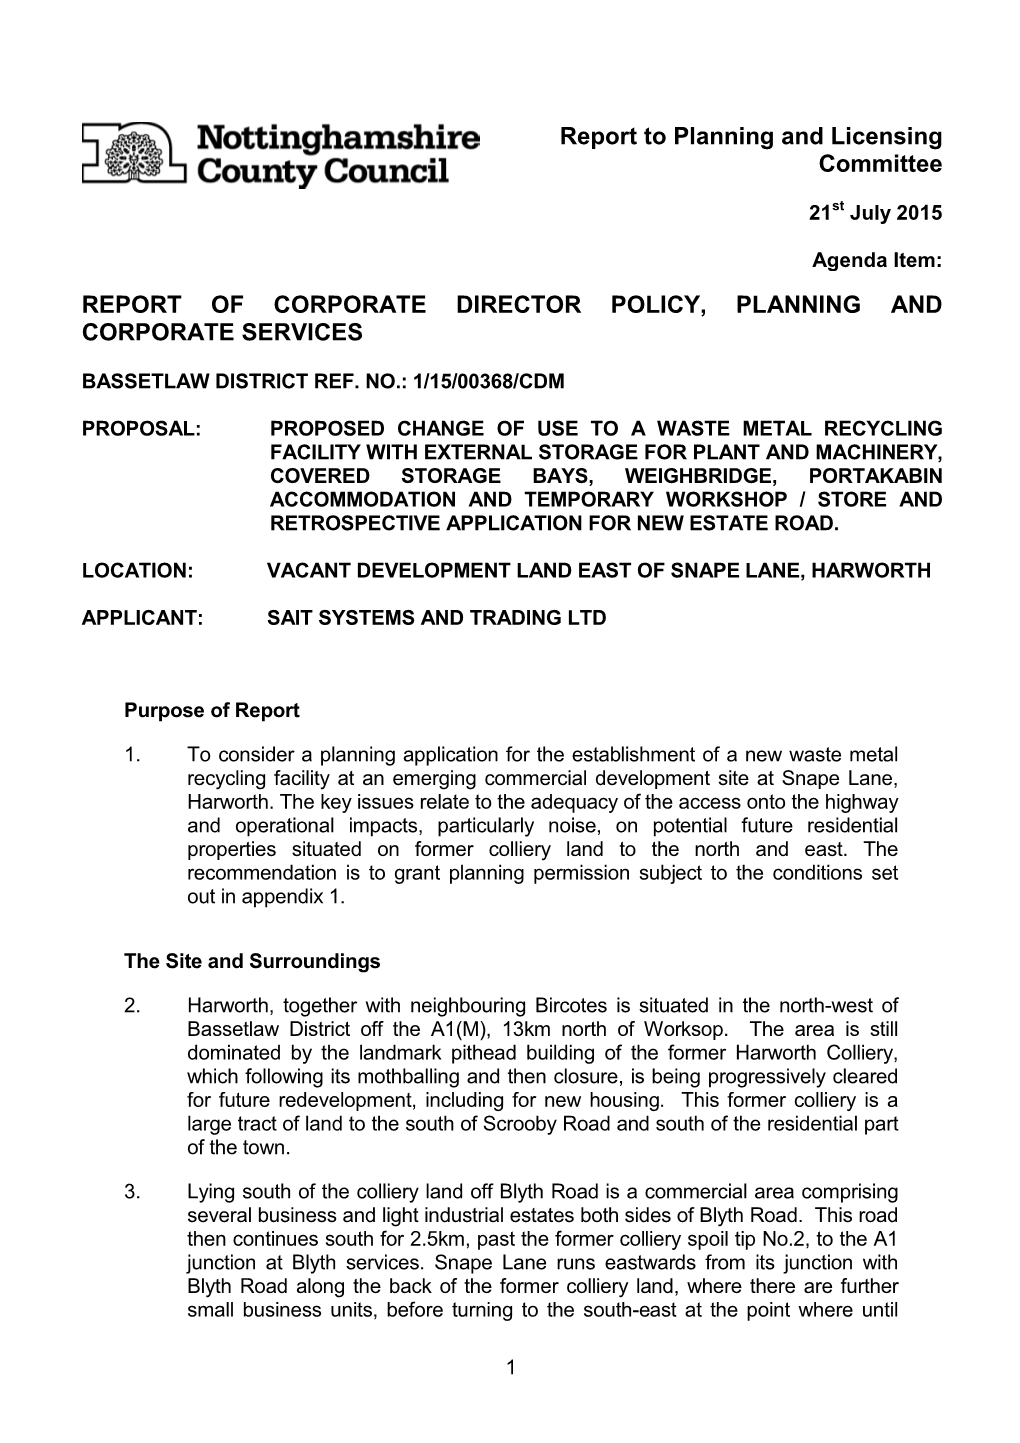 Report to Planning and Licensing Committee REPORT of CORPORATE DIRECTOR POLICY, PLANNING and CORPORATE SERVICES